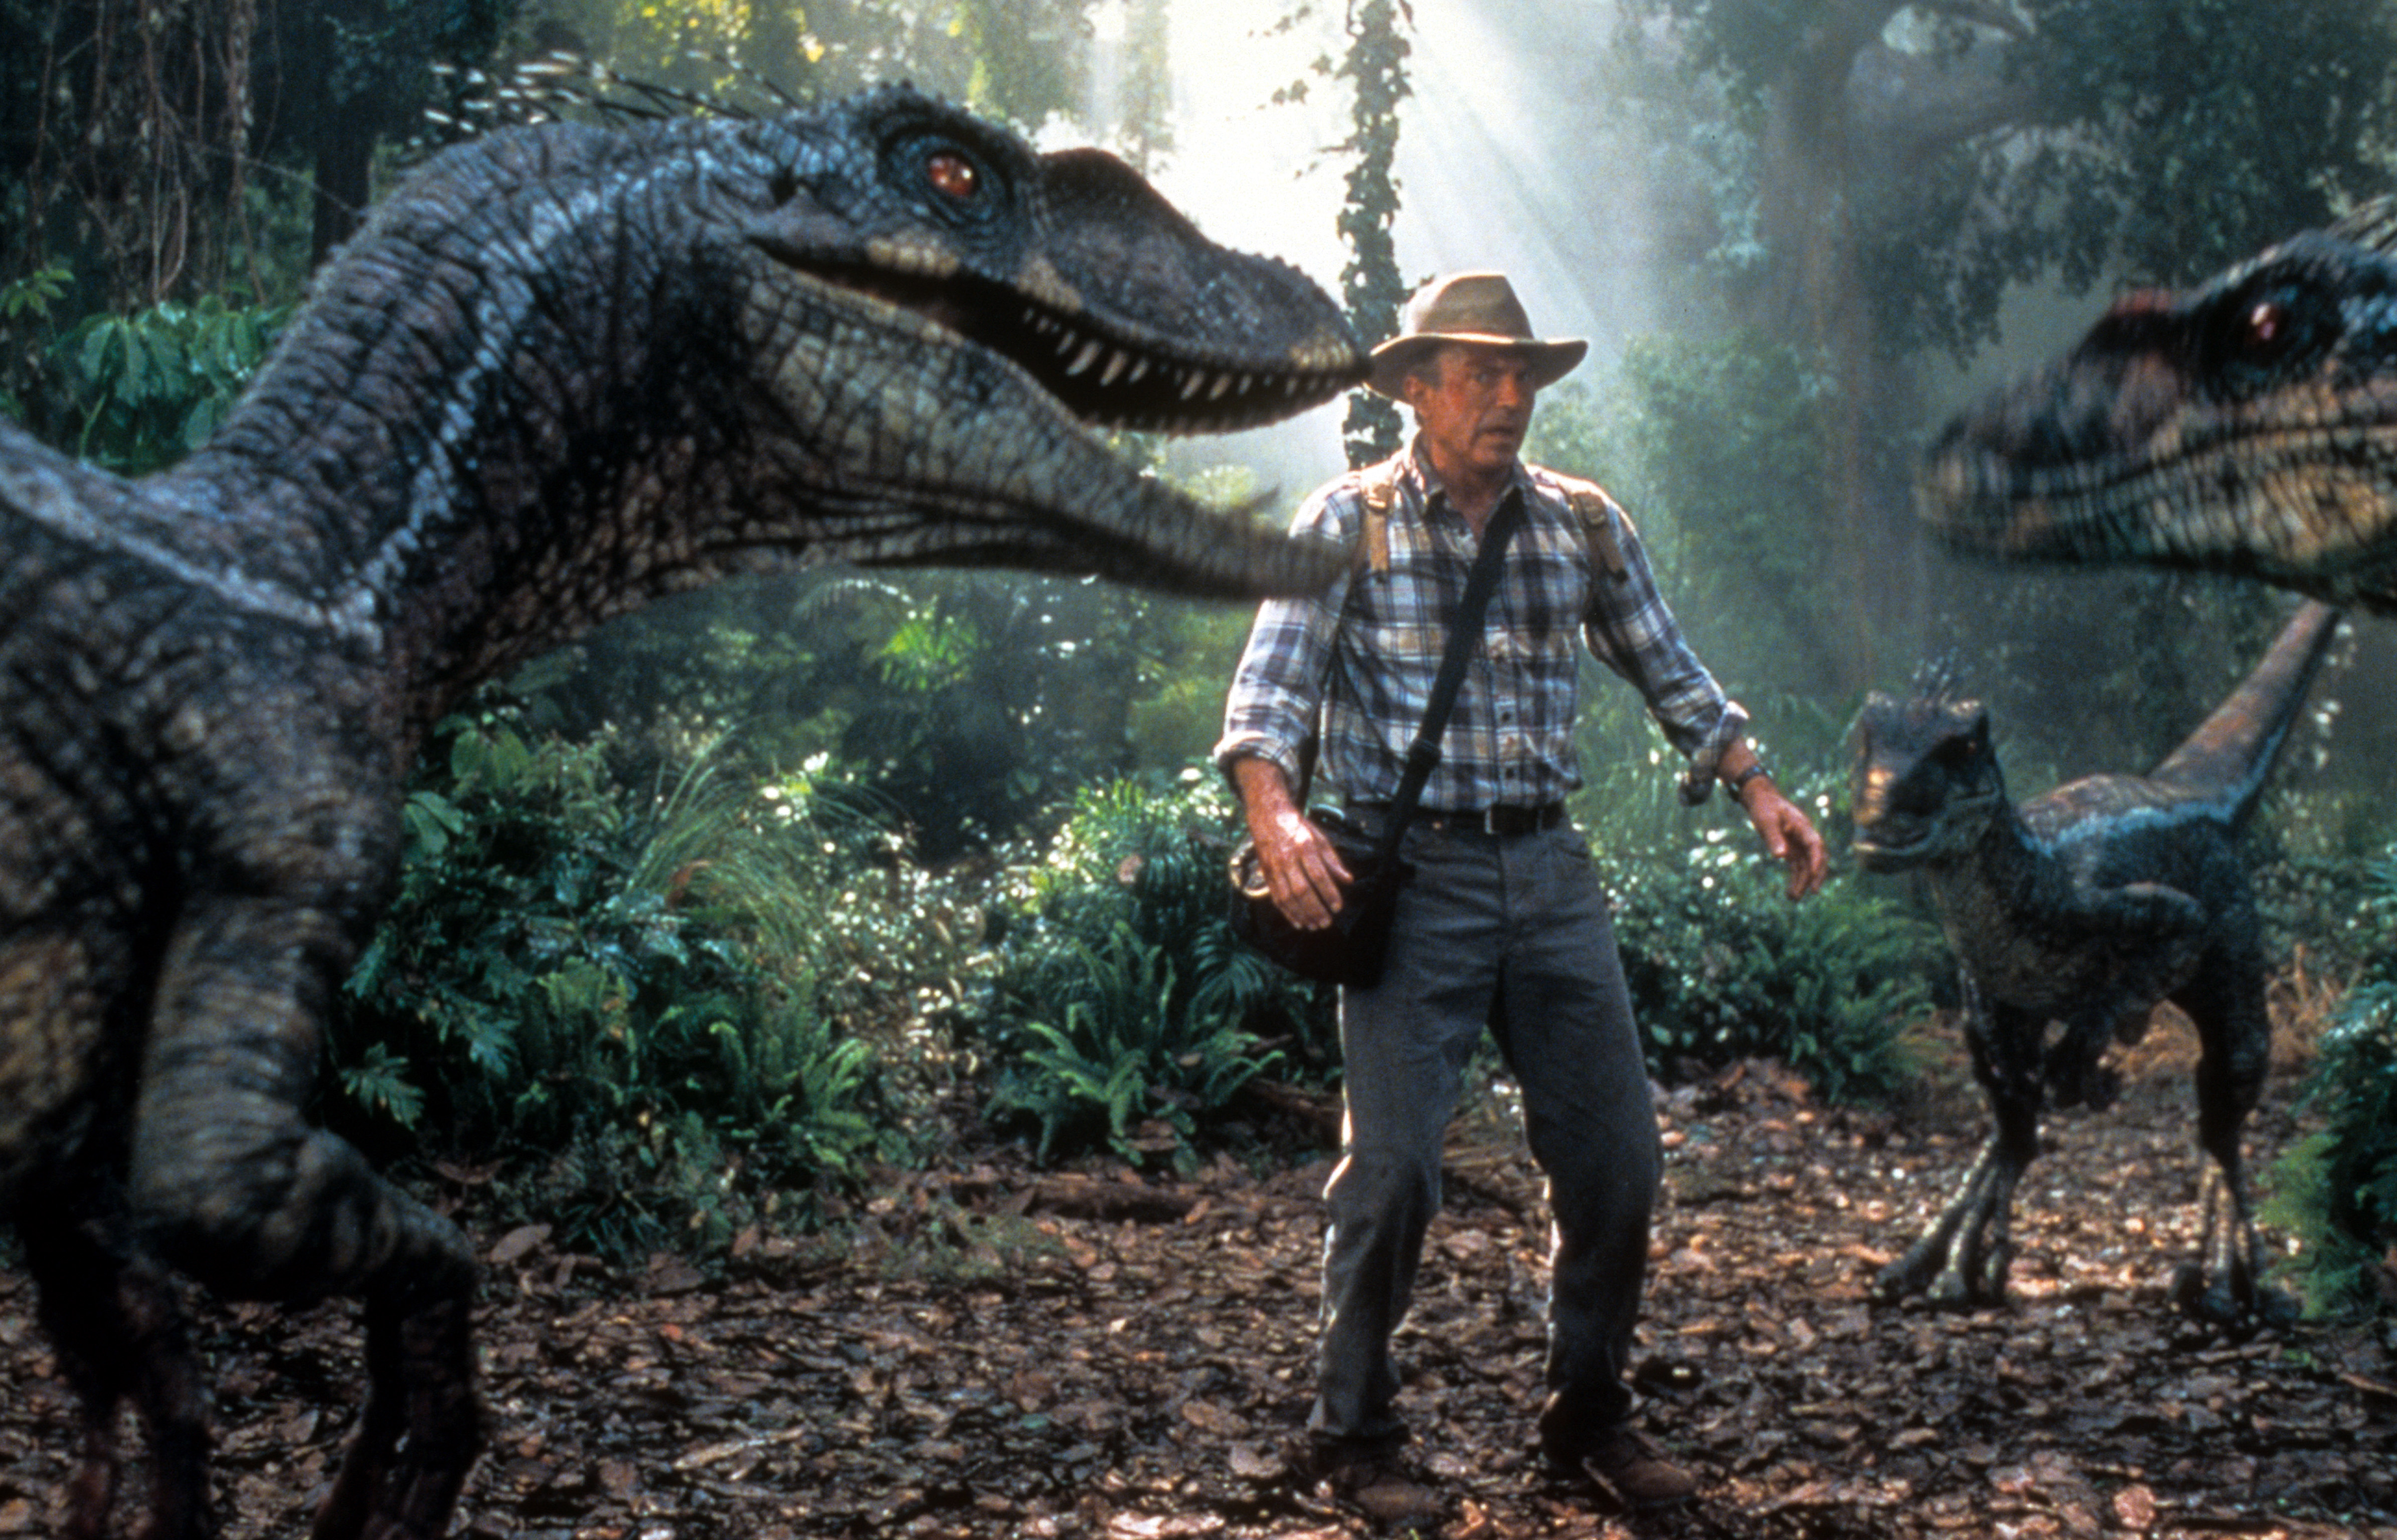 Sam Neill in a scene from the film 'Jurassic Park III', 2001. | Source: Getty Images